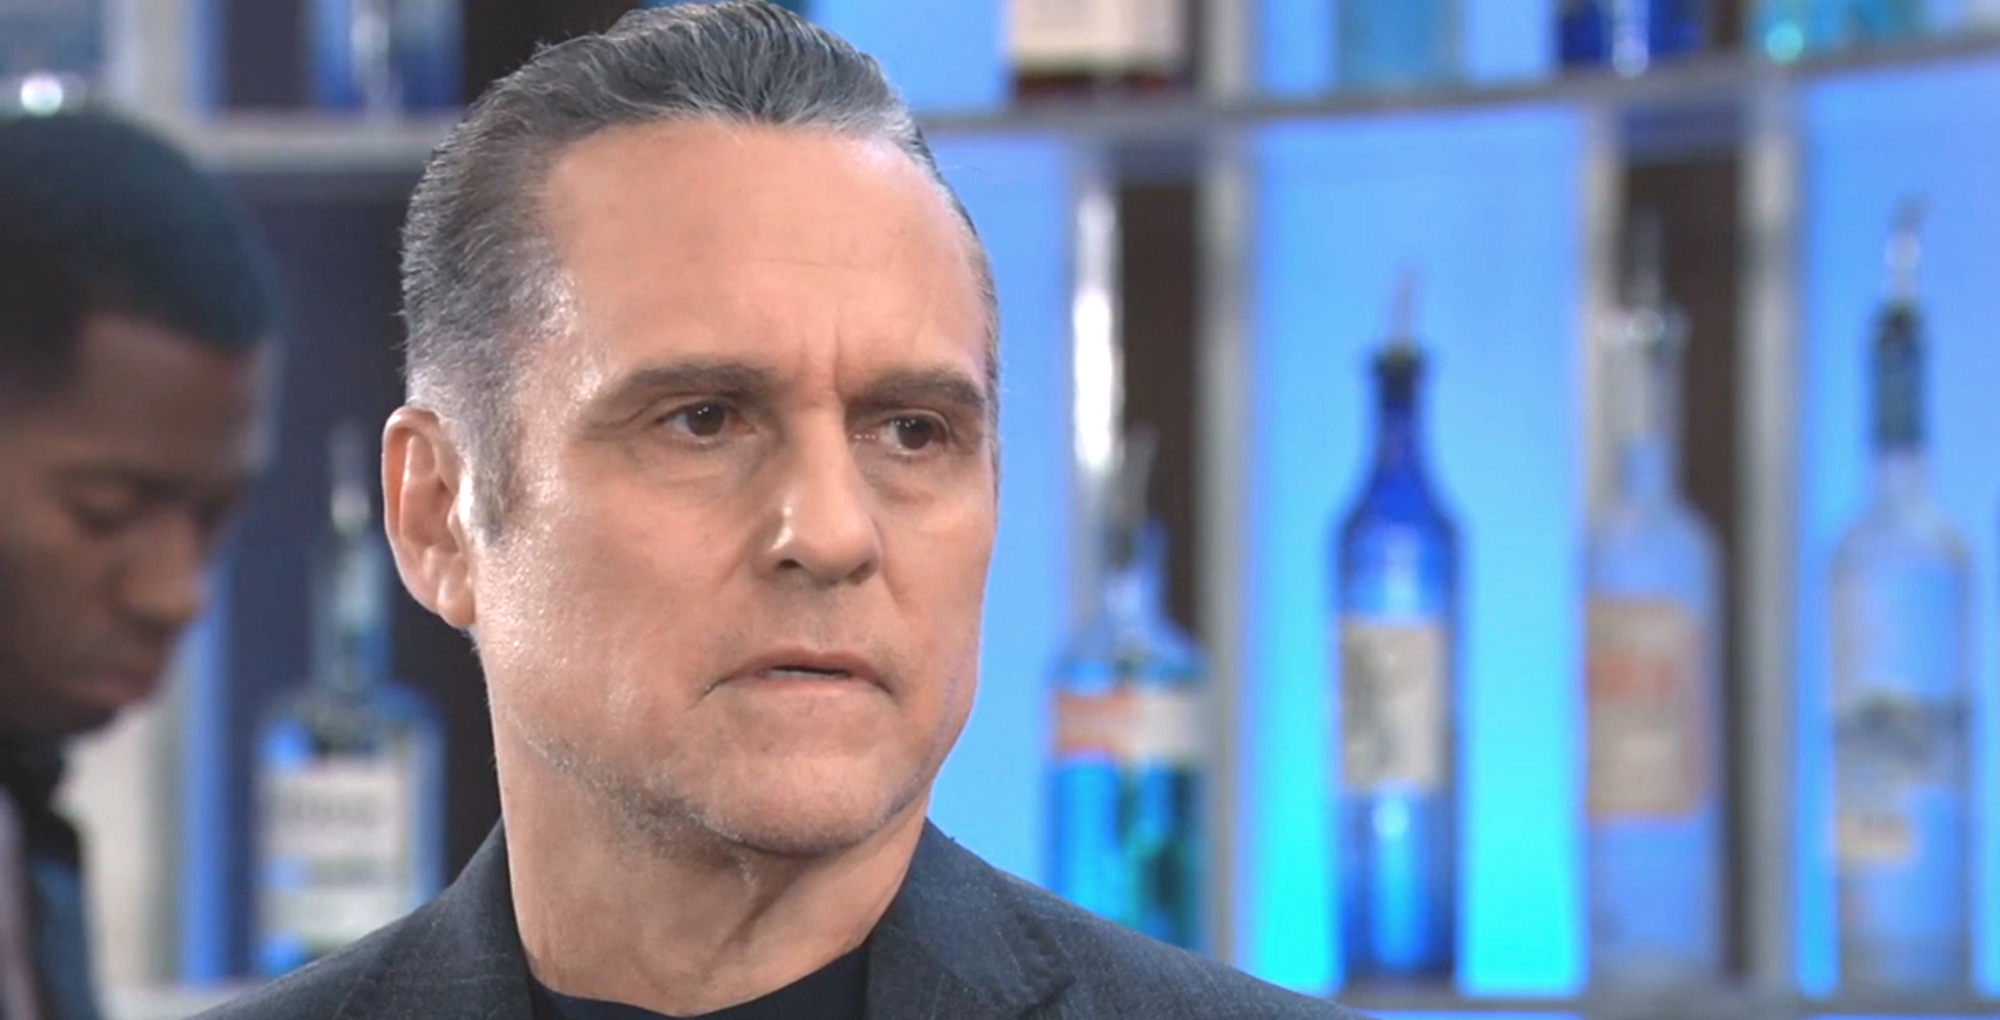 general hospital spoilers for march 9, 2023 tease sonny has some suspicions